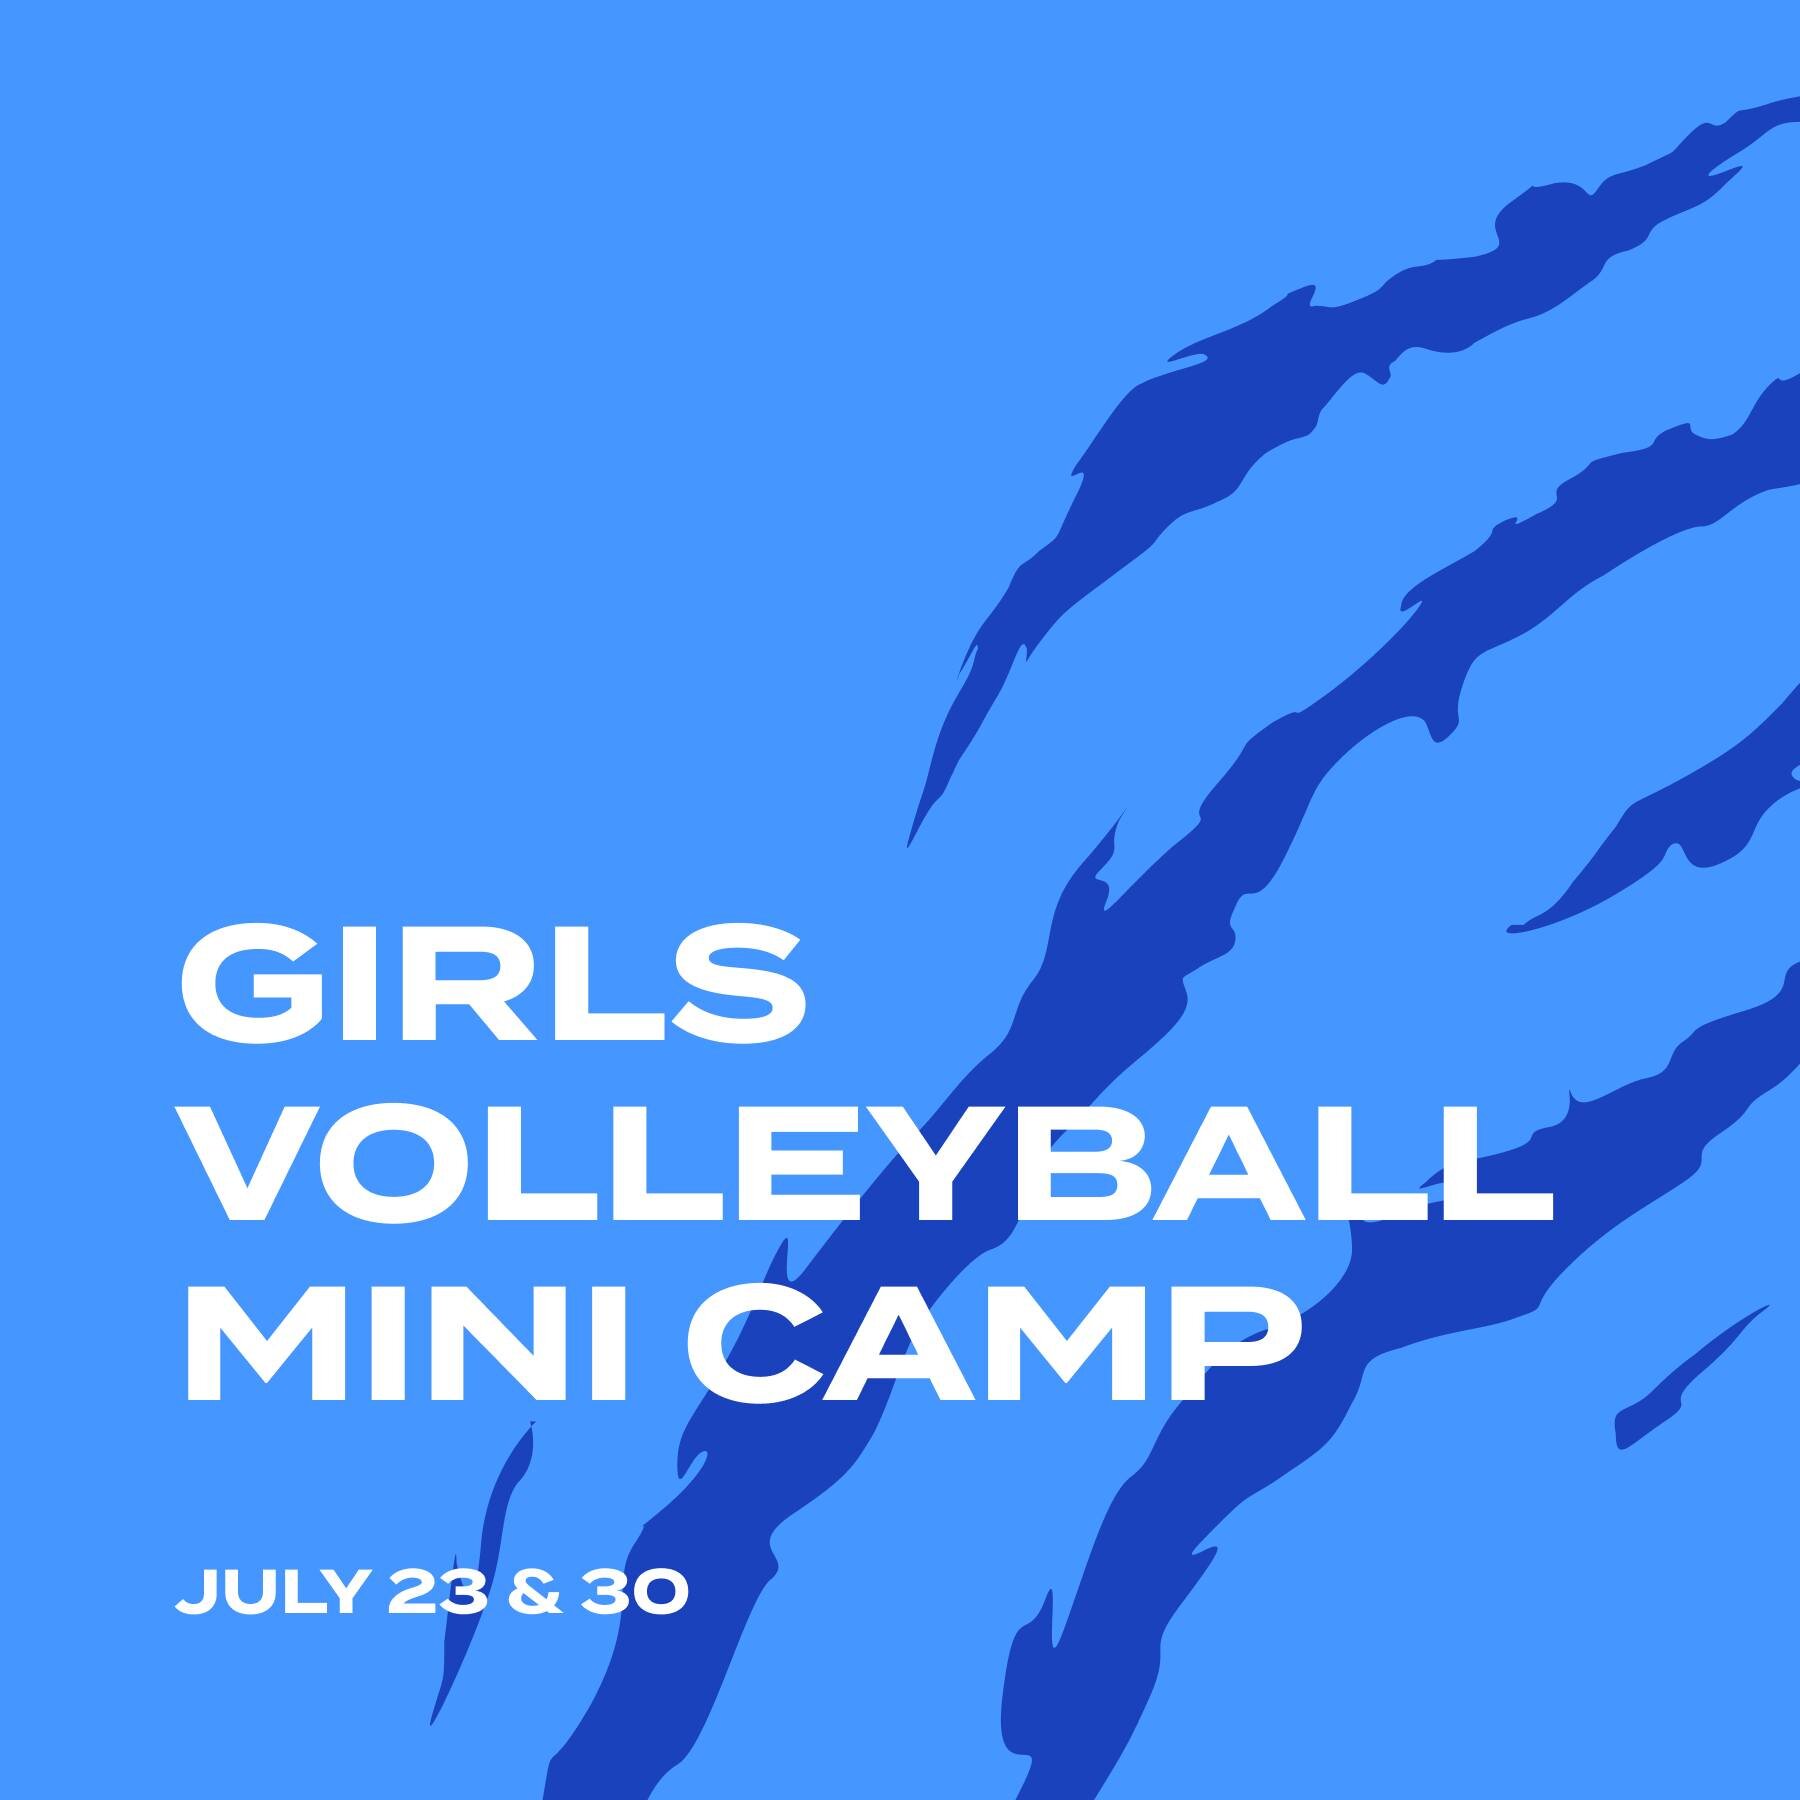 UPDATED POST: SAVE THE DATE!

Free Cougar Mini Volleyball Camps for Middle School and High School Girls:

July 23 &amp; 30 @ Calvary Bible Church

8:30am-10:30am-High School
10:30am-12:30pm-Middle School

Registration will open in the spring